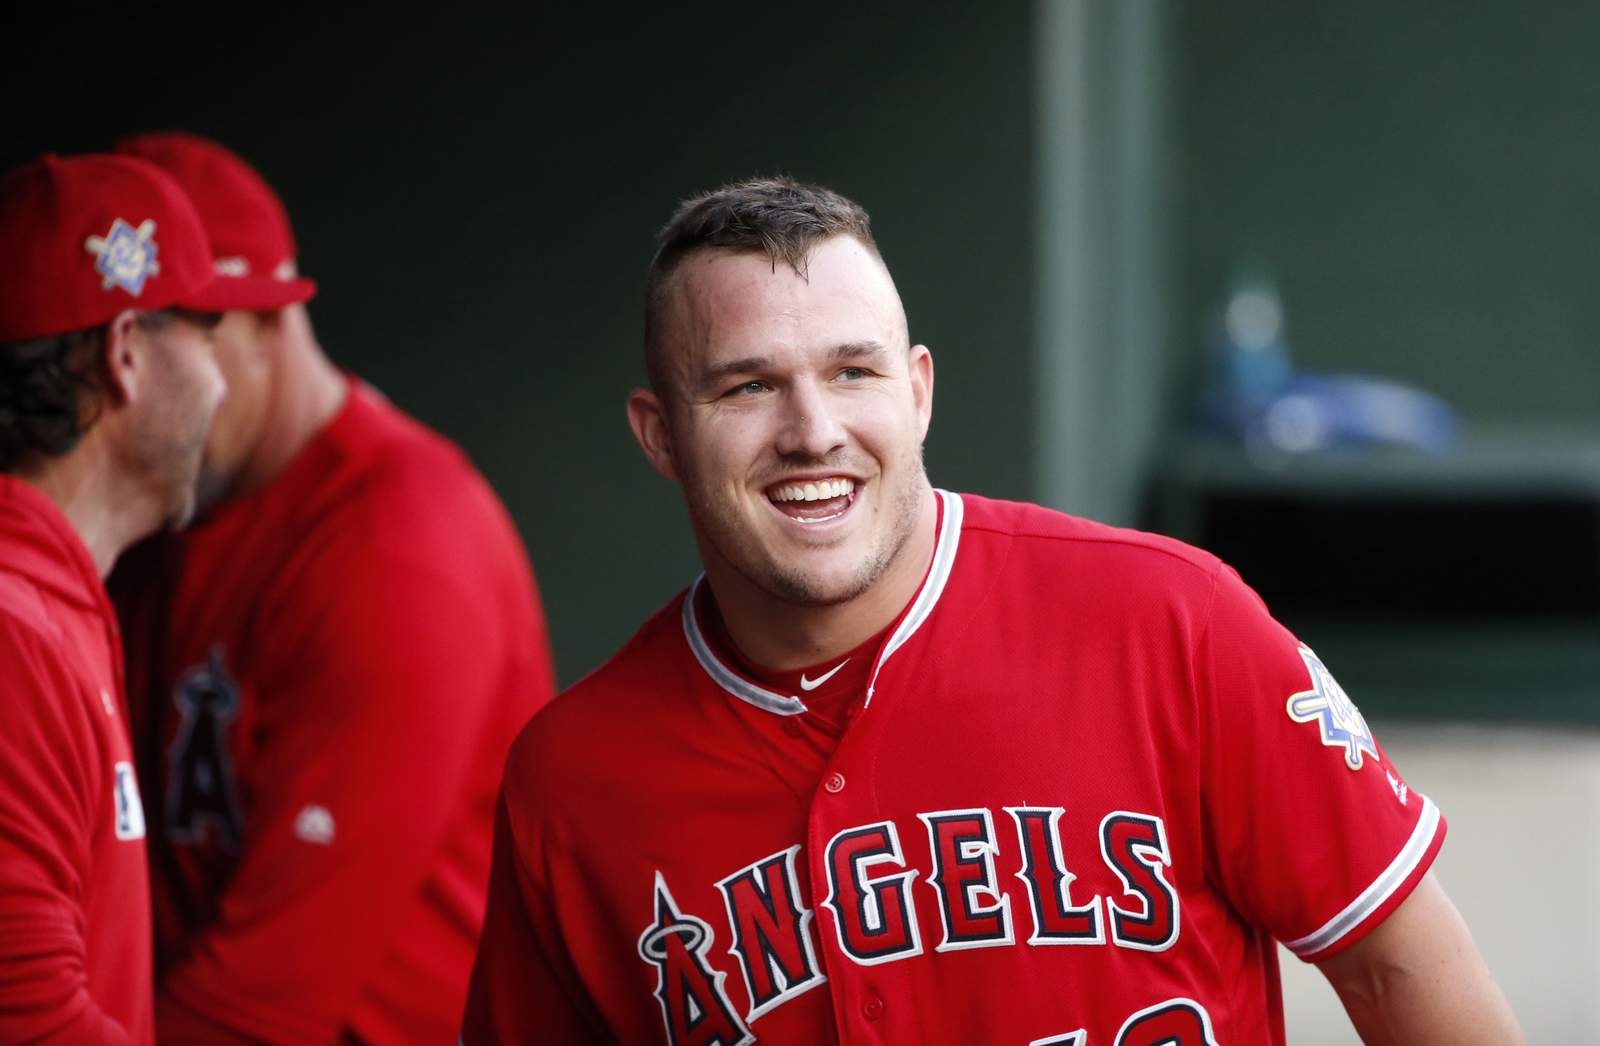 AL MVP Trout still doesn't feel comfortable about this year